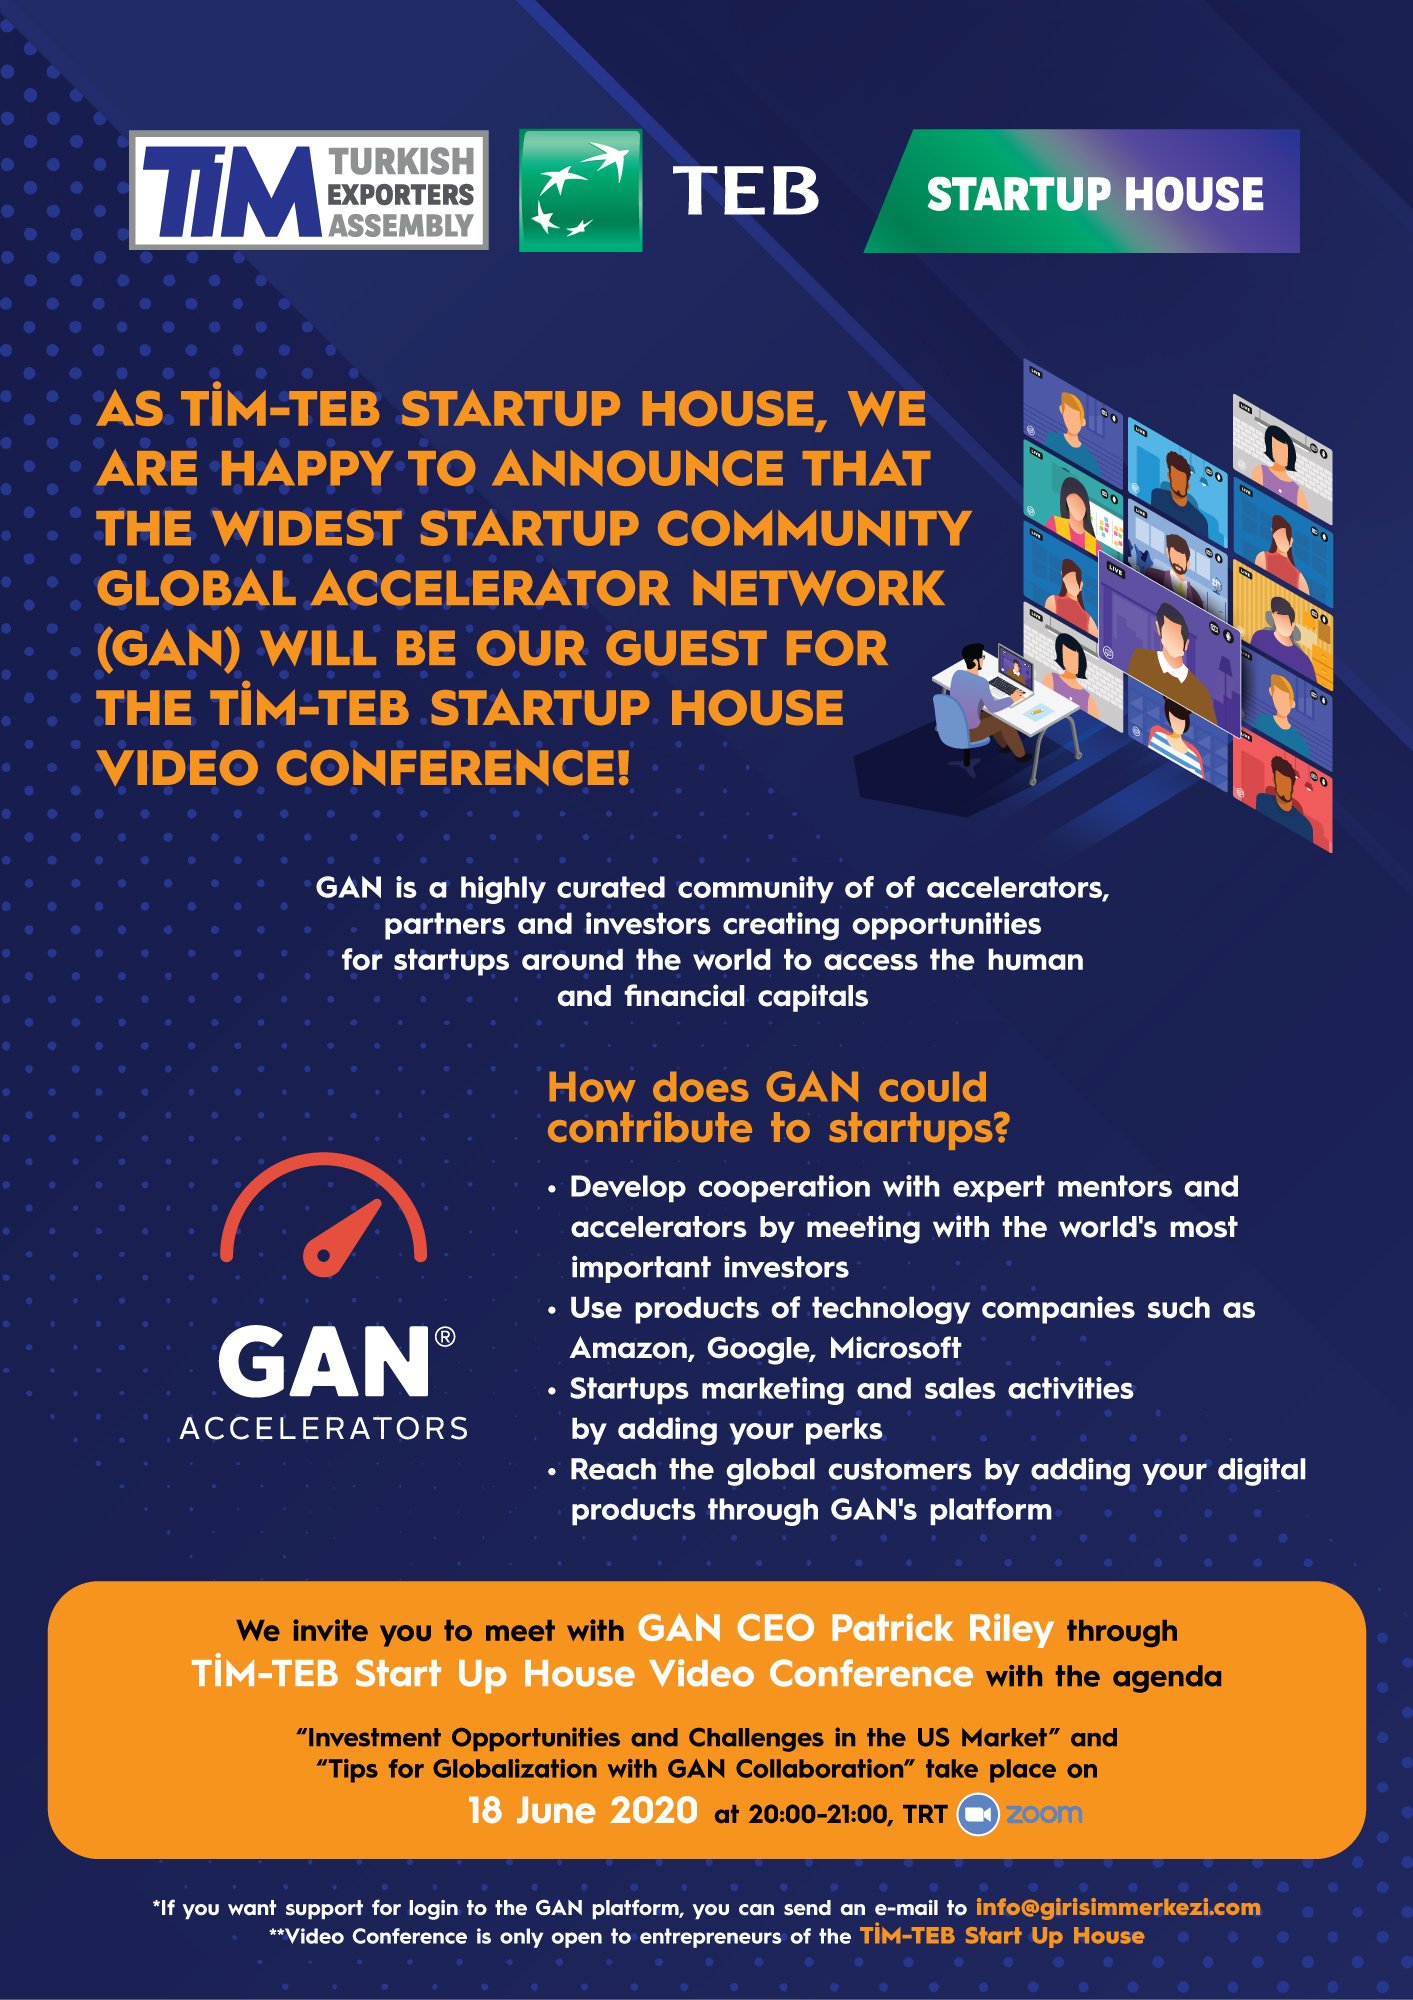 TİM on Twitter: "As TİM-TEB Startup House, we are happy to announce that the widest startup community of @GANConnect CEO @rileypat will be our guest for the #TİMTEBStartupHouse Video Conference Gathering